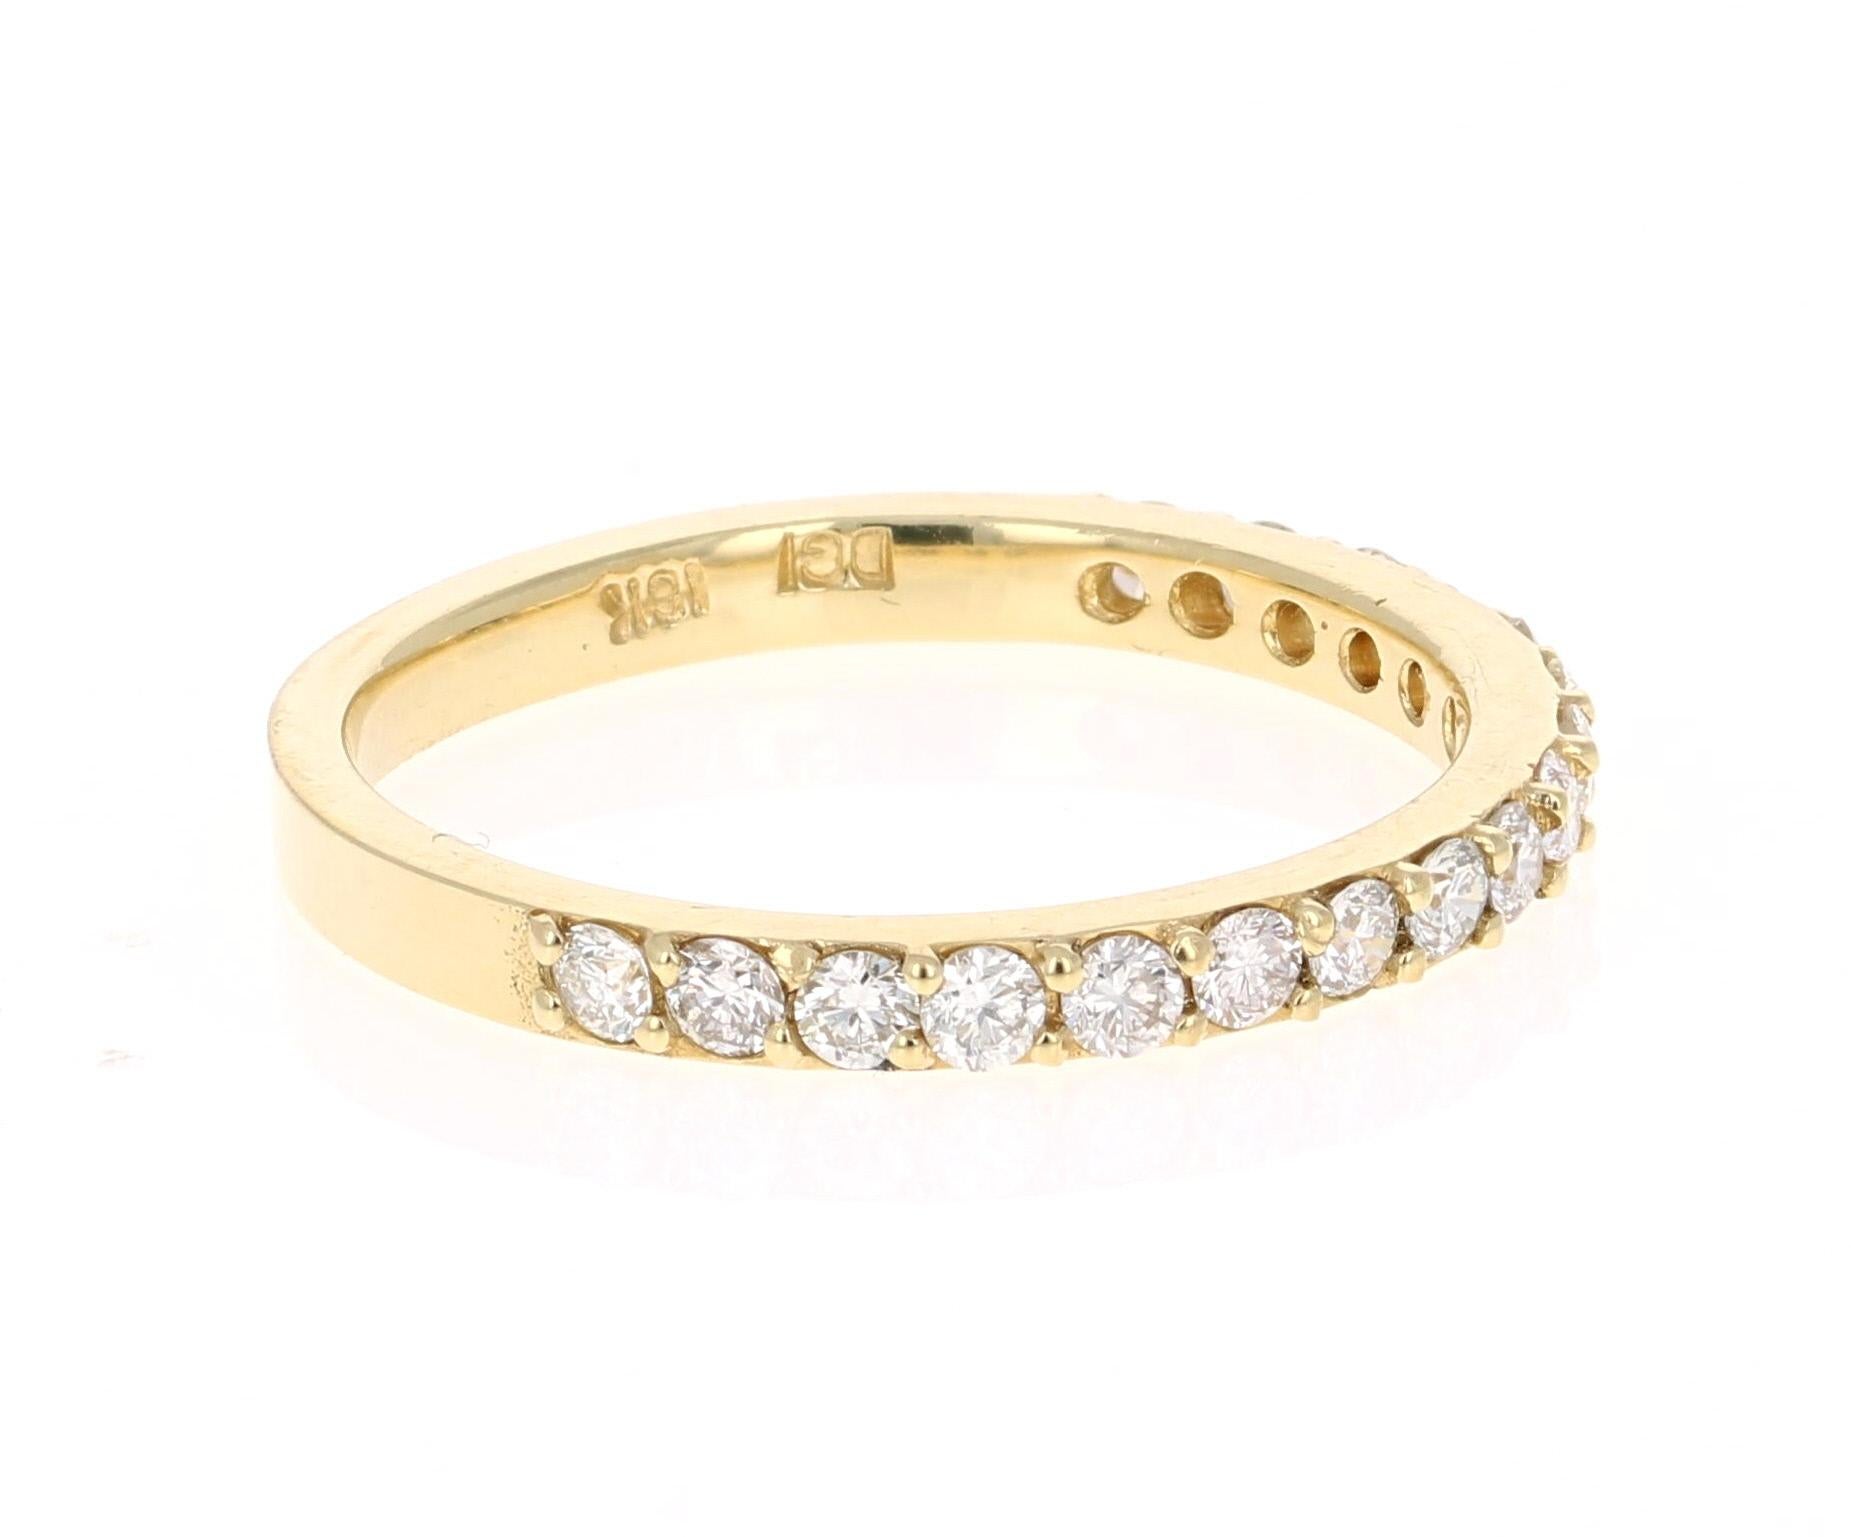 A beautiful band that can be worn as a single band or stack with other bands in other colors of Gold! 

This ring has 17 Round Cut Diamonds that weigh 0.51 Carats. The clarity and color of the diamonds are VS-H.

Crafted in 18 Karat Yellow Gold and